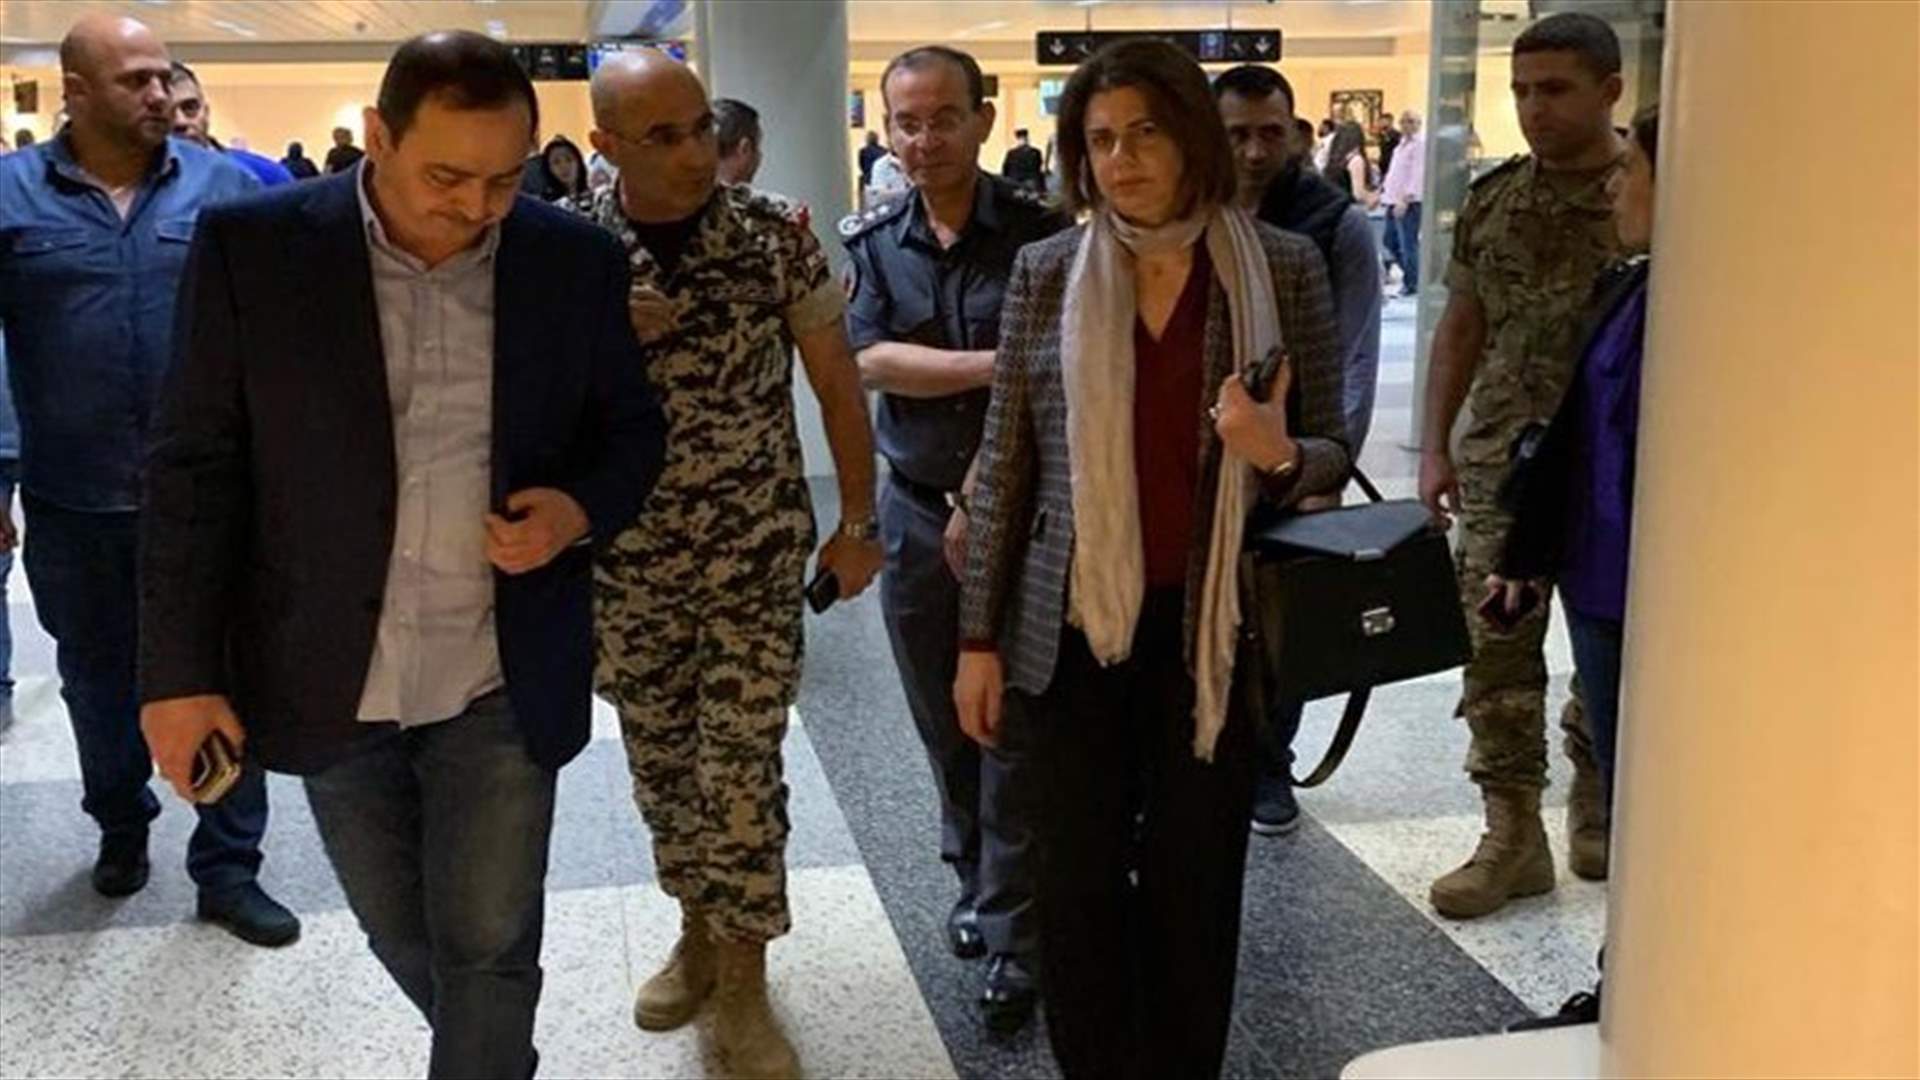 Minister al-Hassan inspects new security measures at Beirut airport